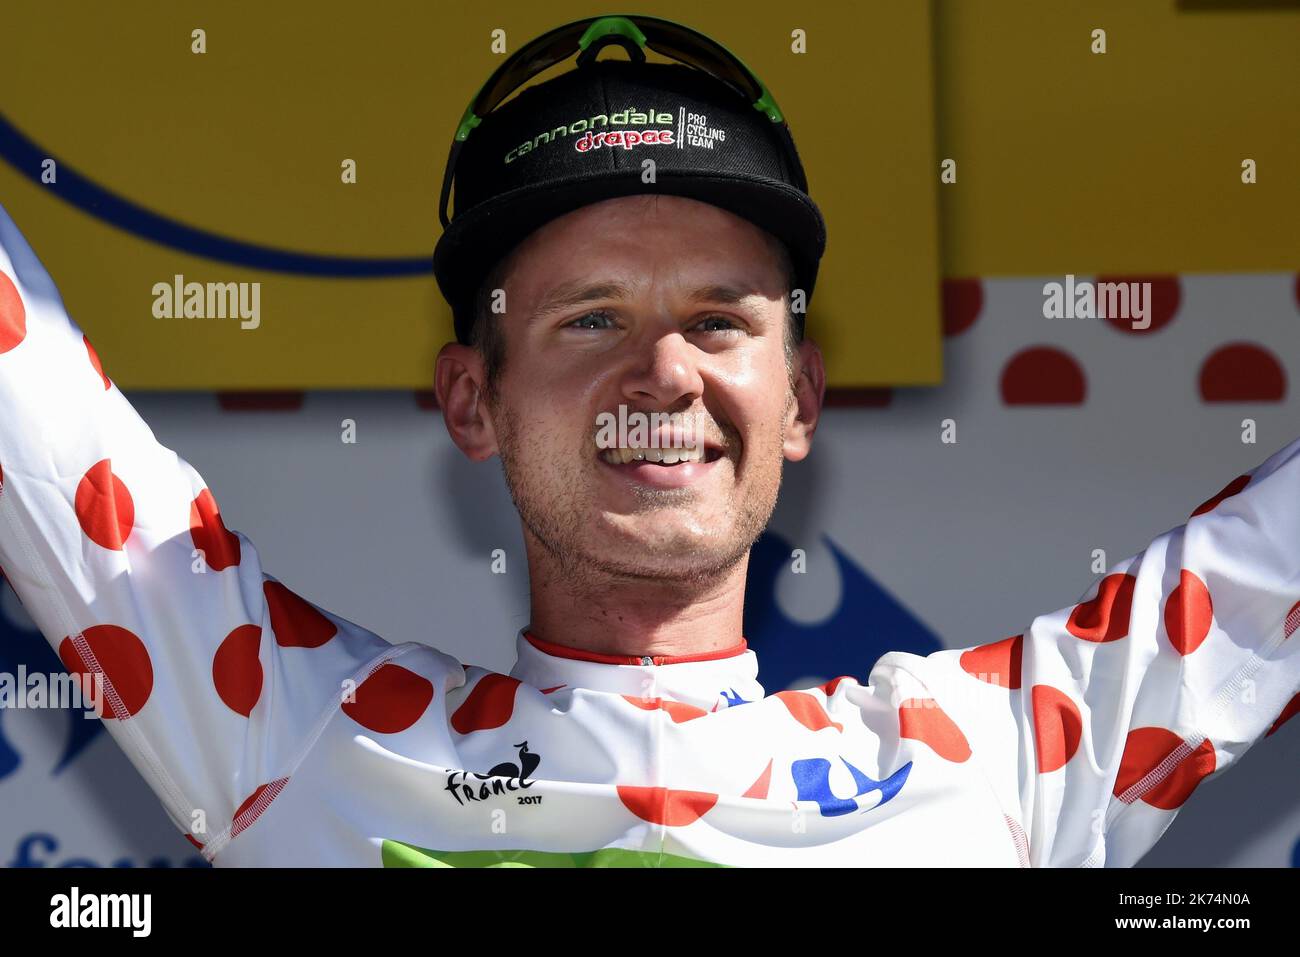 Nathan BROWN conserve son maillot Blanc à Pois Rouges. PHOTO Alexandre MARCHI.   Running from Saturday July 1st to Sunday July 23rd 2017, the 104th Tour de France is  made up of 21 stages and cover a total distance of 3,540 kilometres. Stock Photo